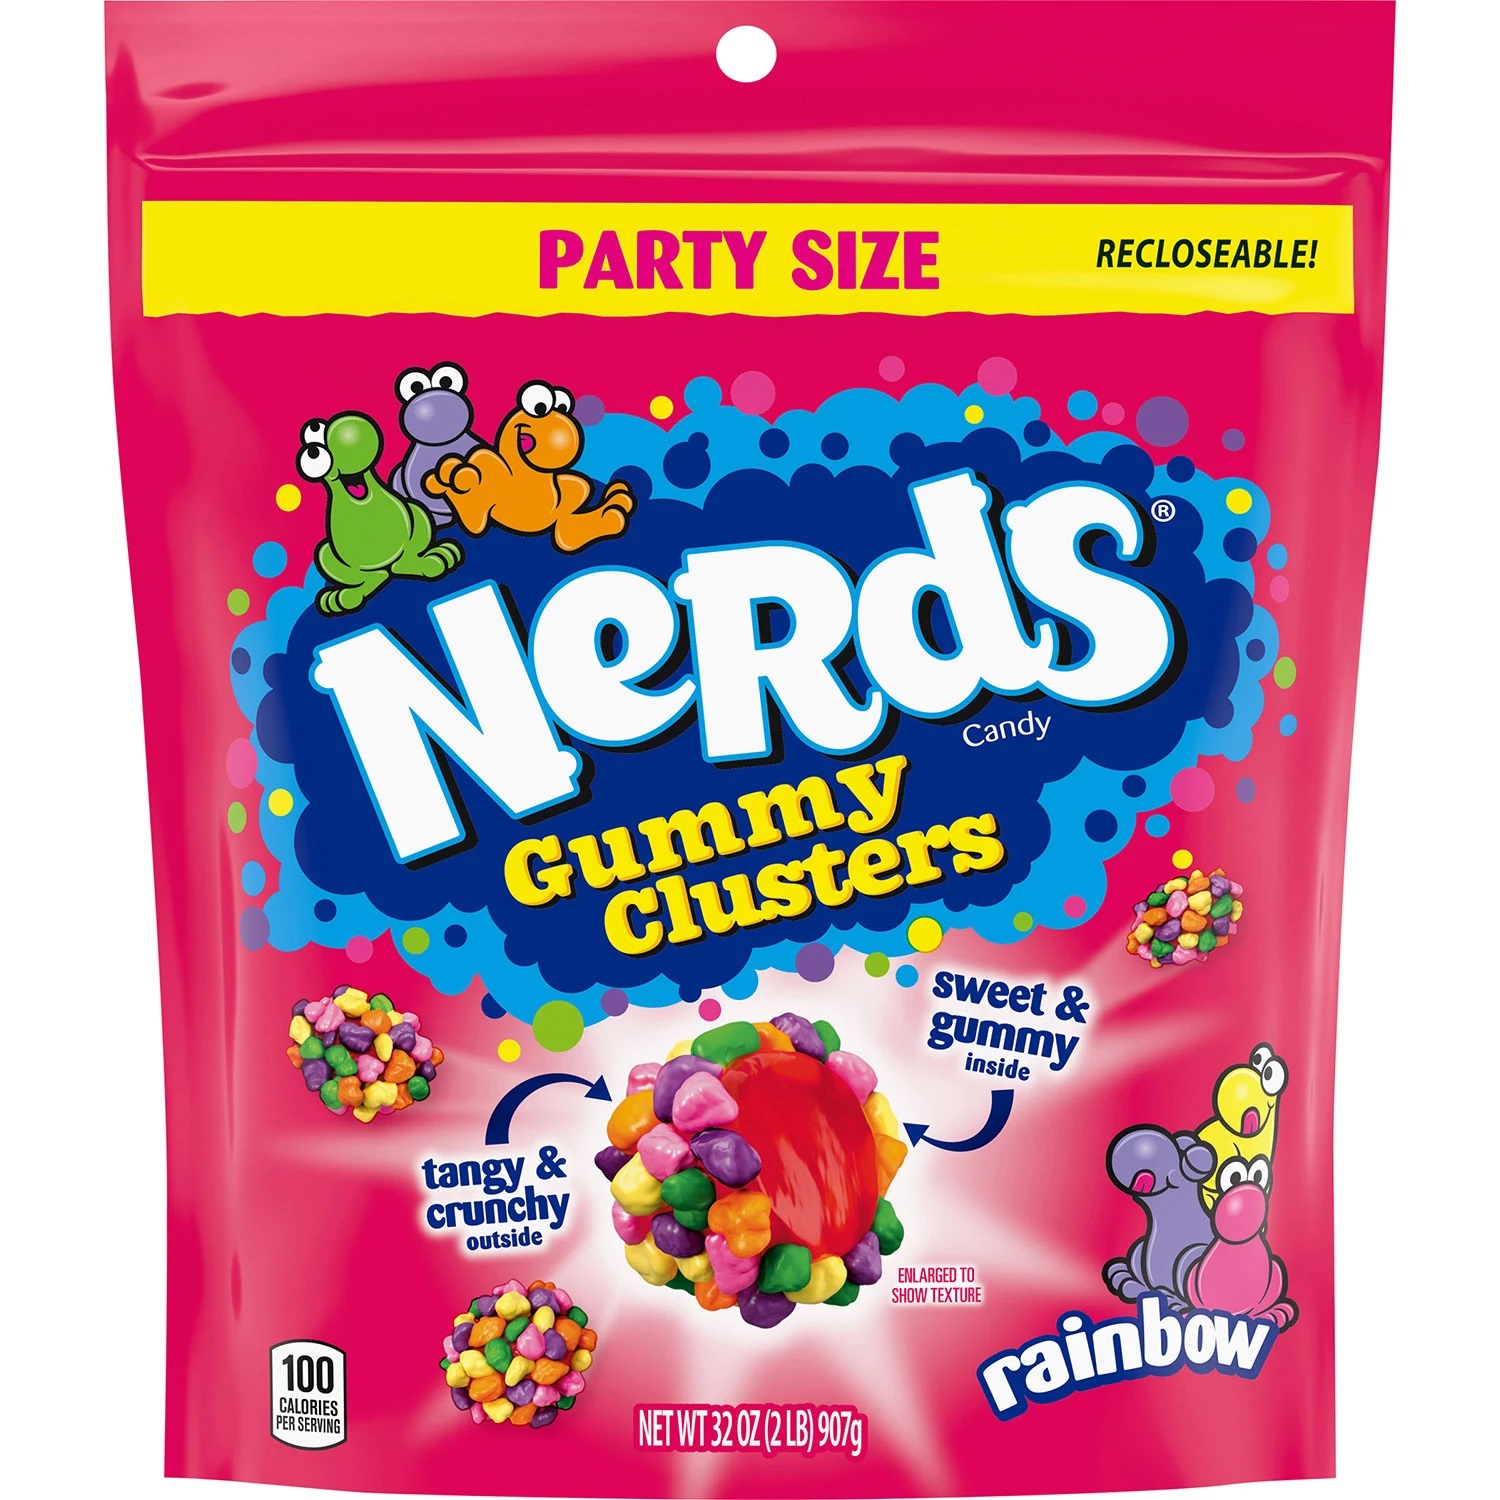 Nerds Gummy Clusters Family Size (32 Ounce)